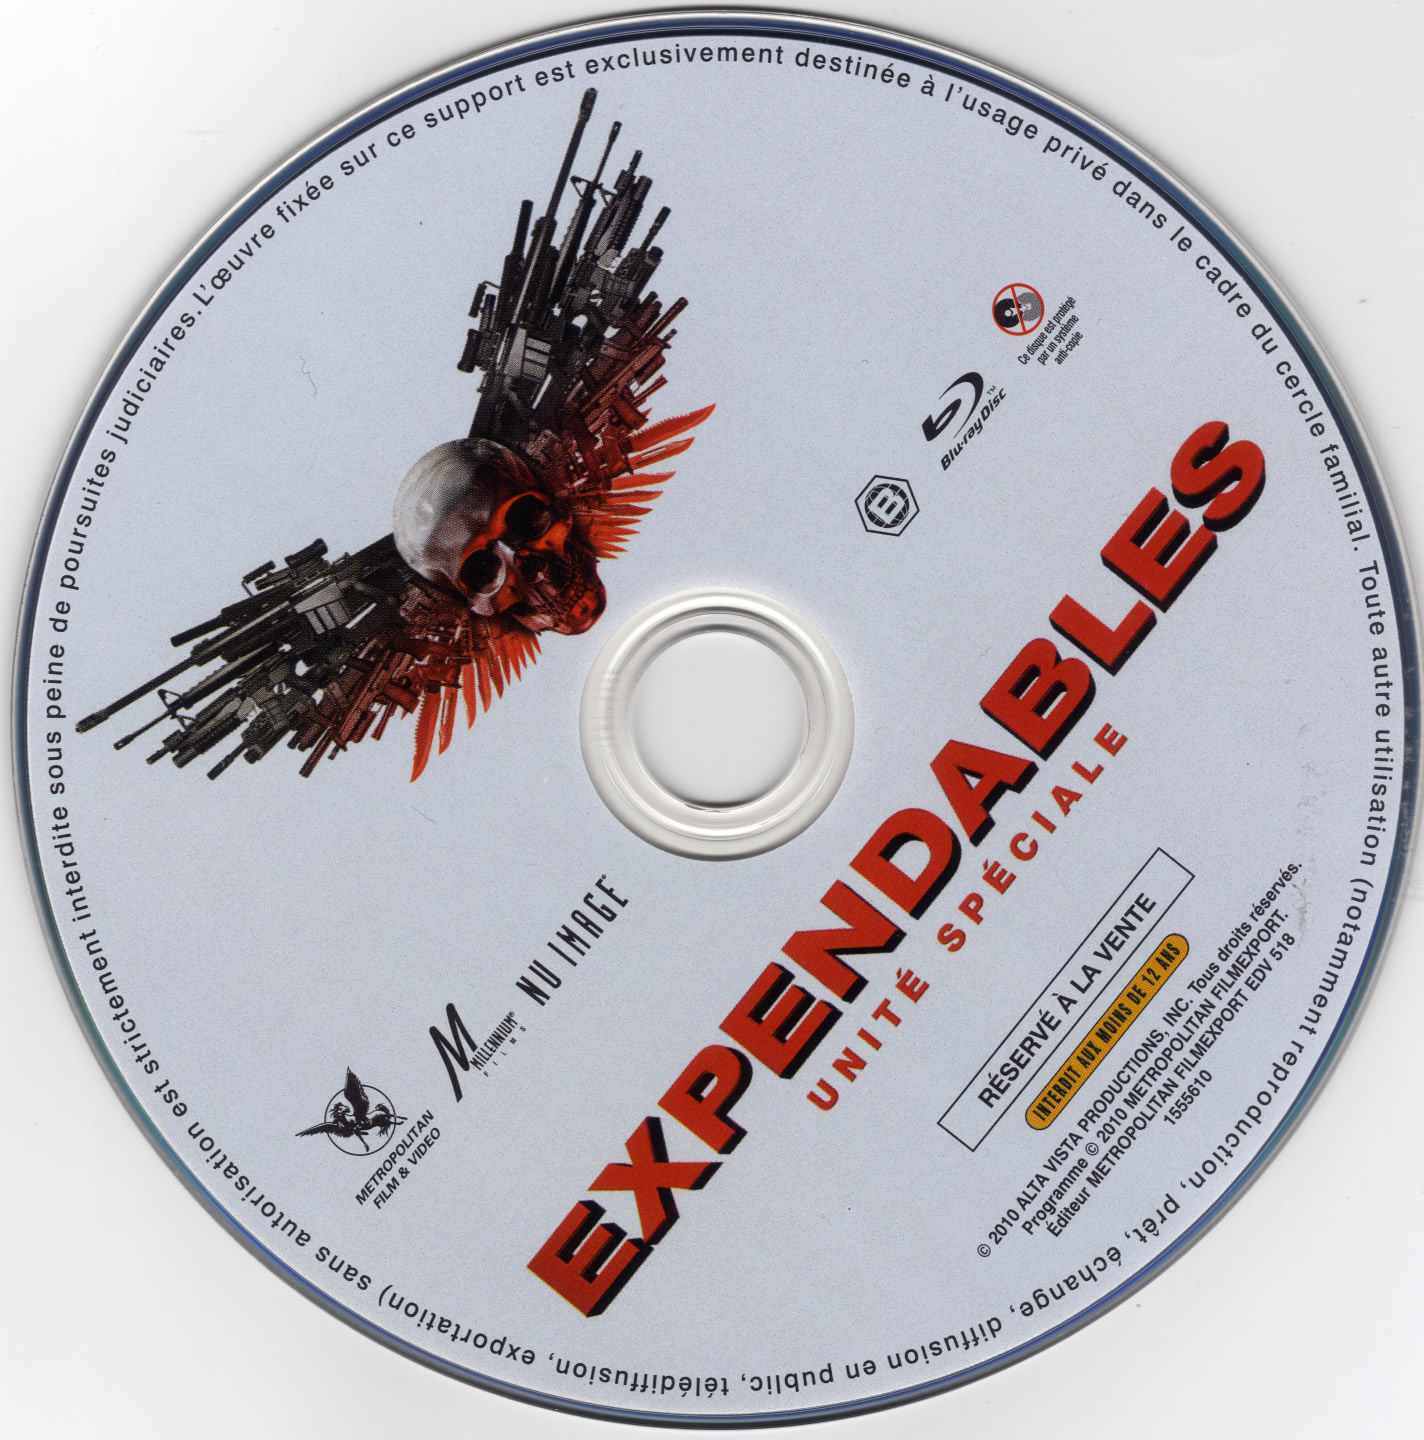 Expendables (BLU-RAY)